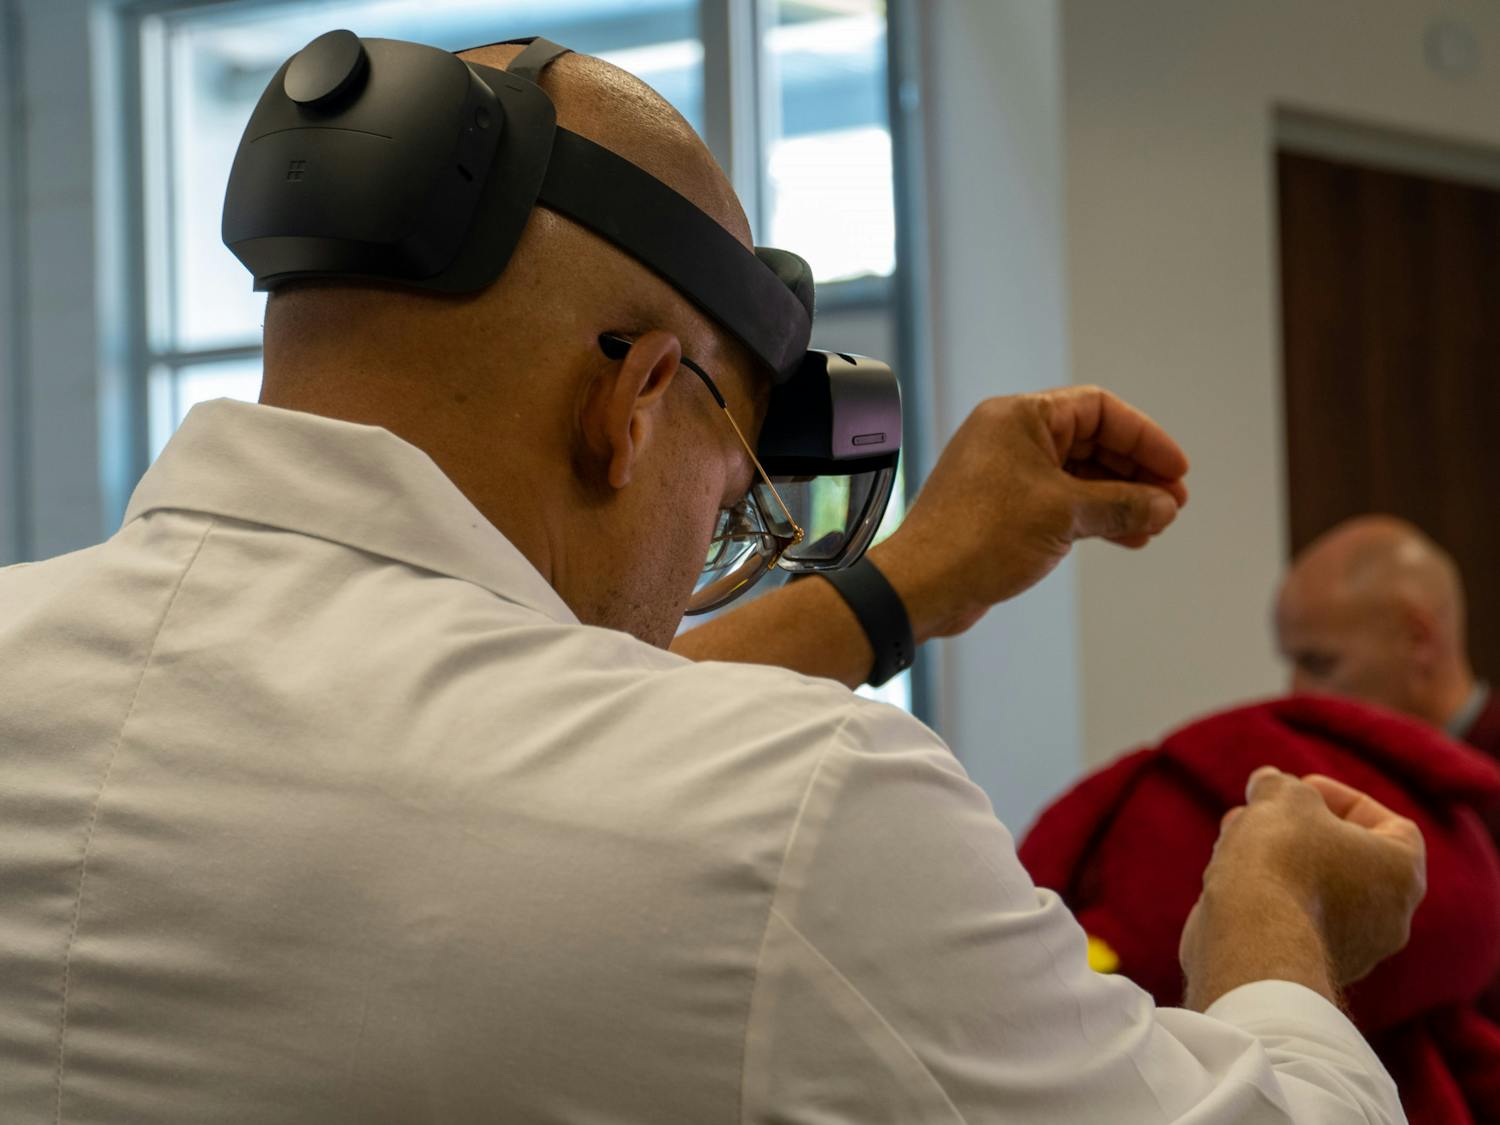 Assistant Professor of the School of Nursing Dwayne Alleyne leads a demonstration on performing surgeries using virtual technology on Sept. 16, 2022. Verizon has partnered with USC labs aiming to provide students with valuable experiences with industry-standard technology.&nbsp;